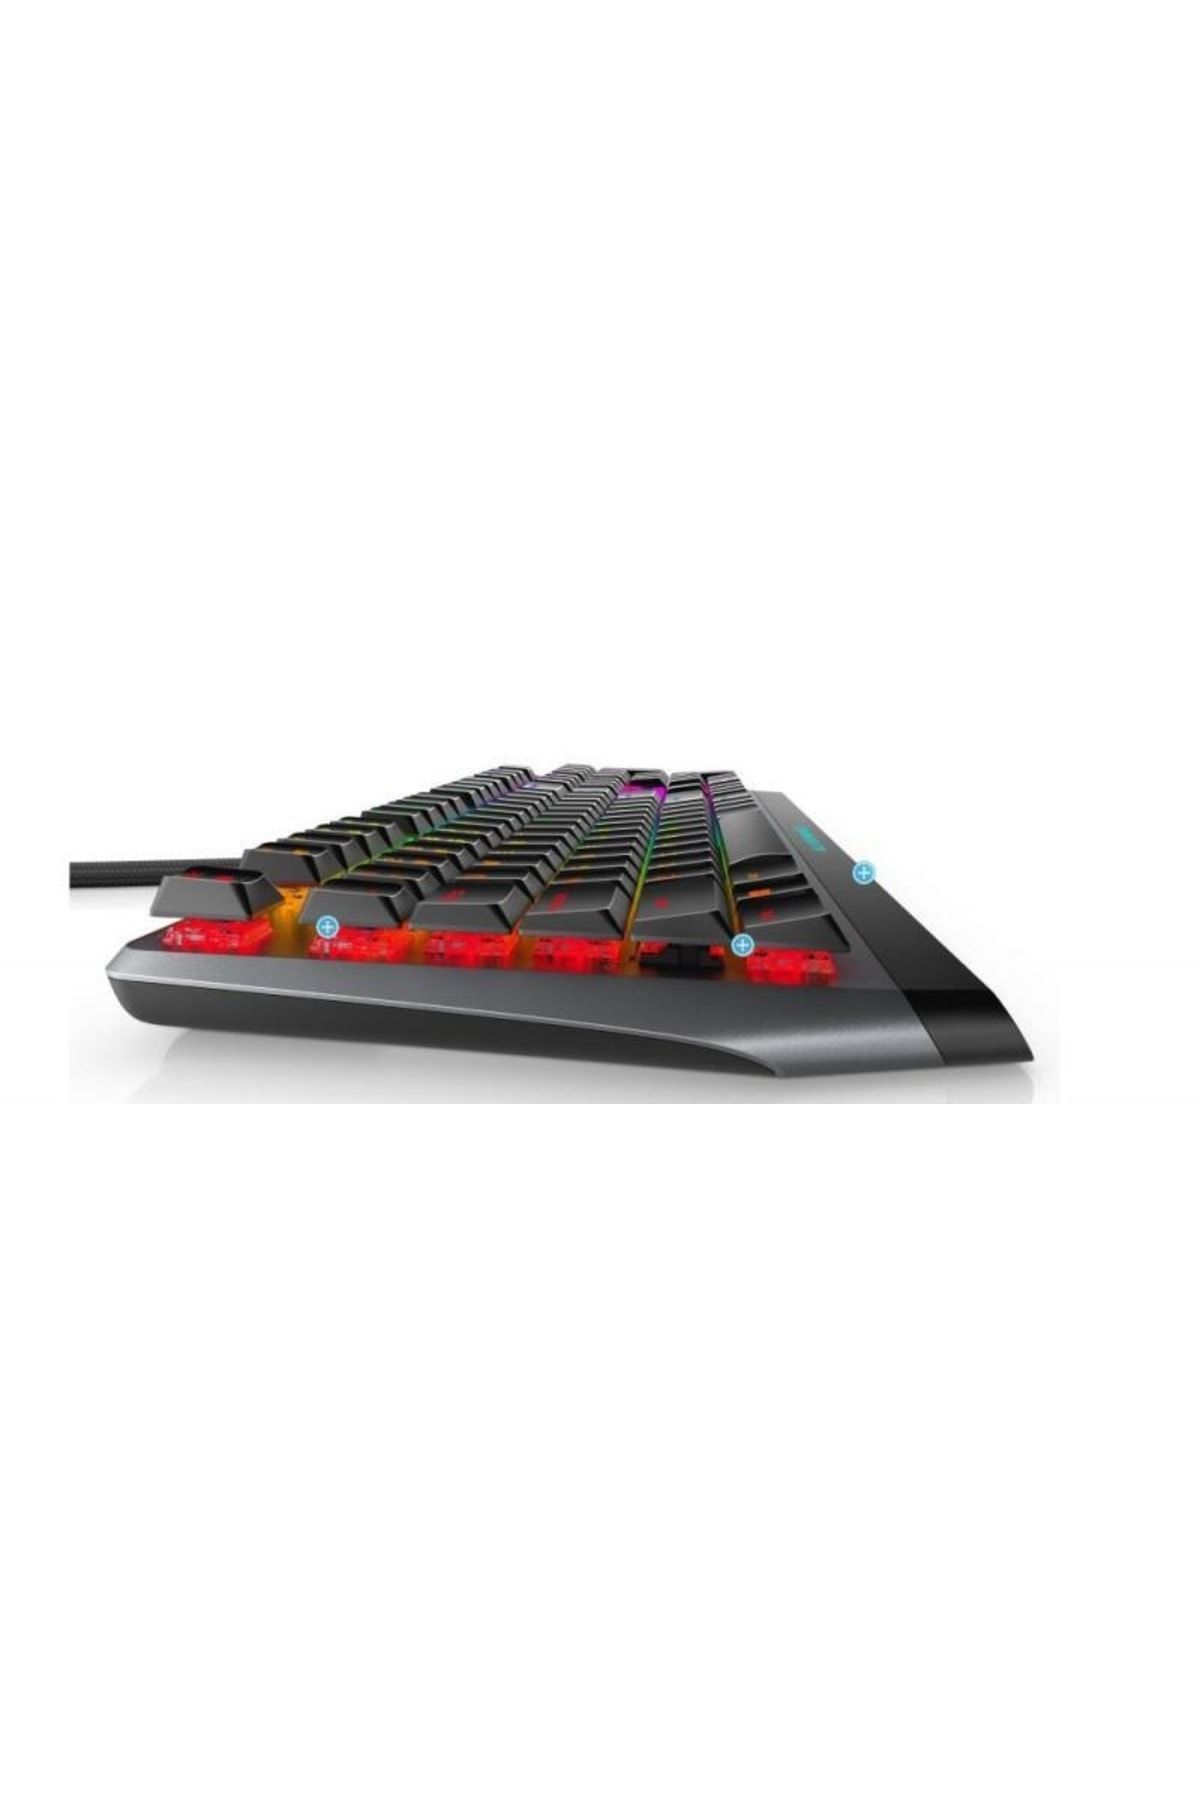 Dell 545-bbcl Alienware Low-profile Rgb Mechanical Gaming Keyboard - Aw510k Dark Side